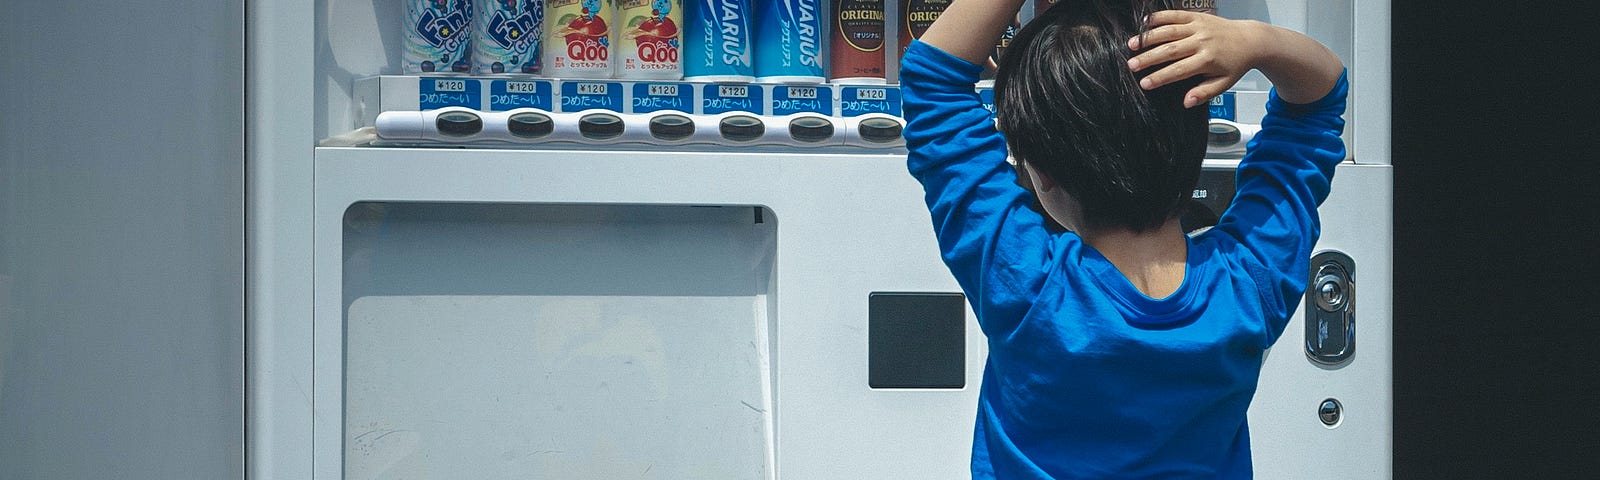 A kid looking at beverages to make a choice